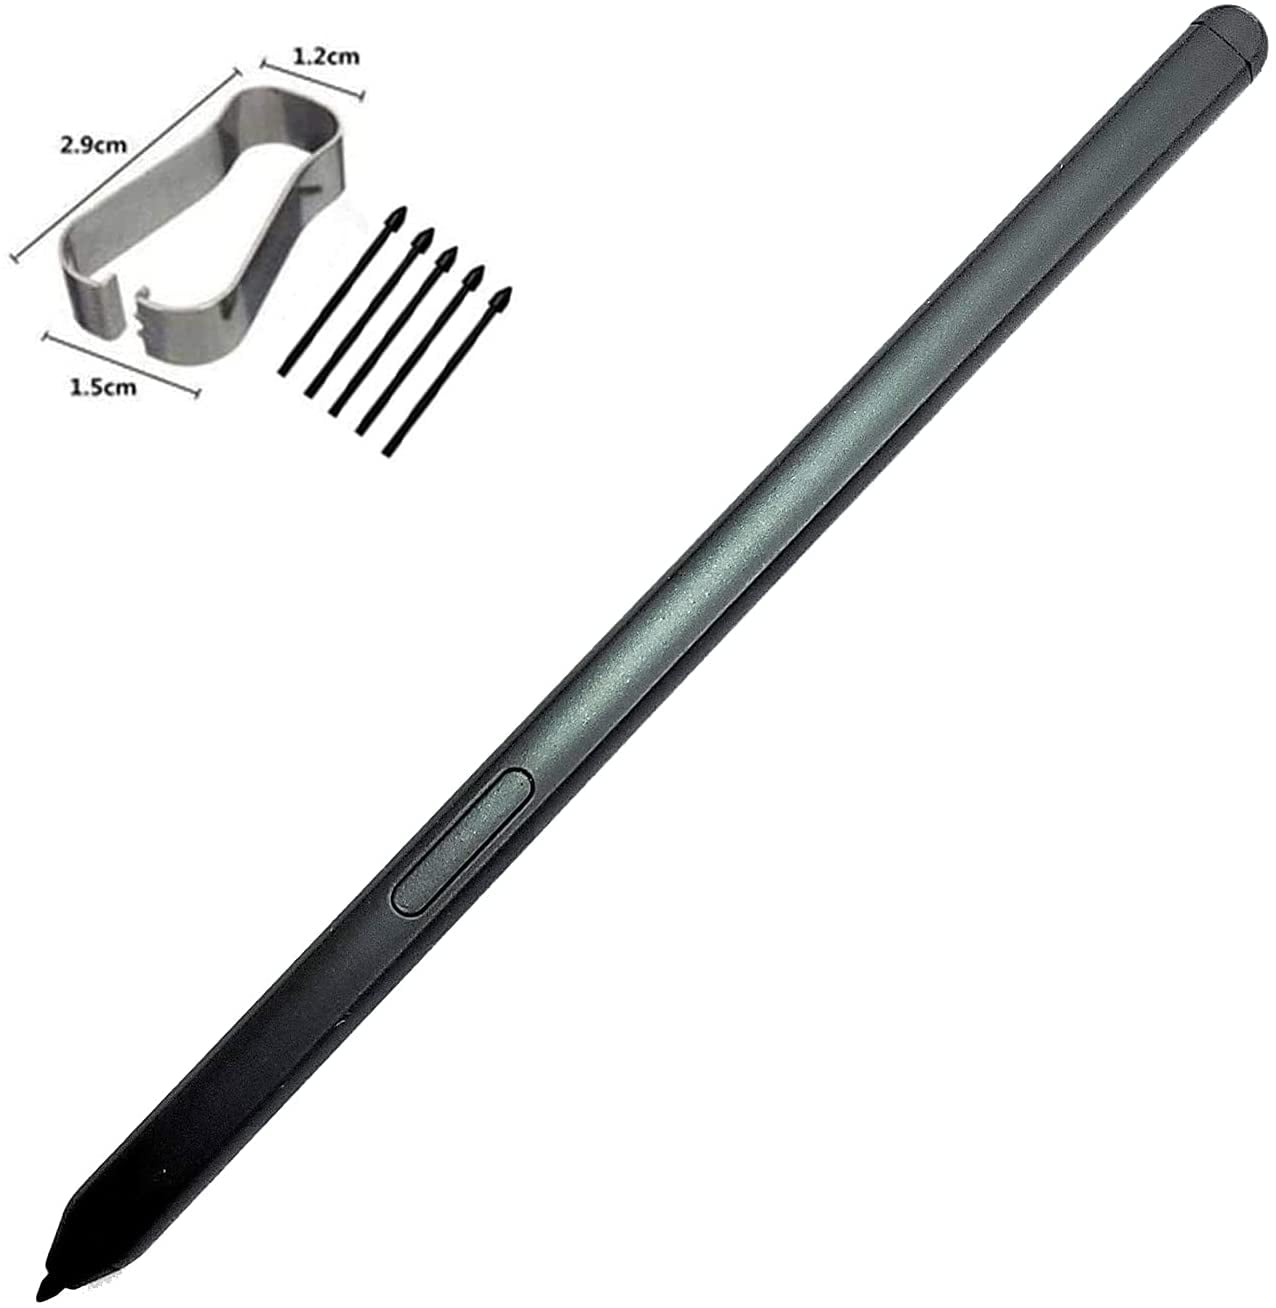 Eaglewireless Stylus S Pen Pencil for Samsung Galaxy S21 Ultra S21U with 5 Replacement Tips Black